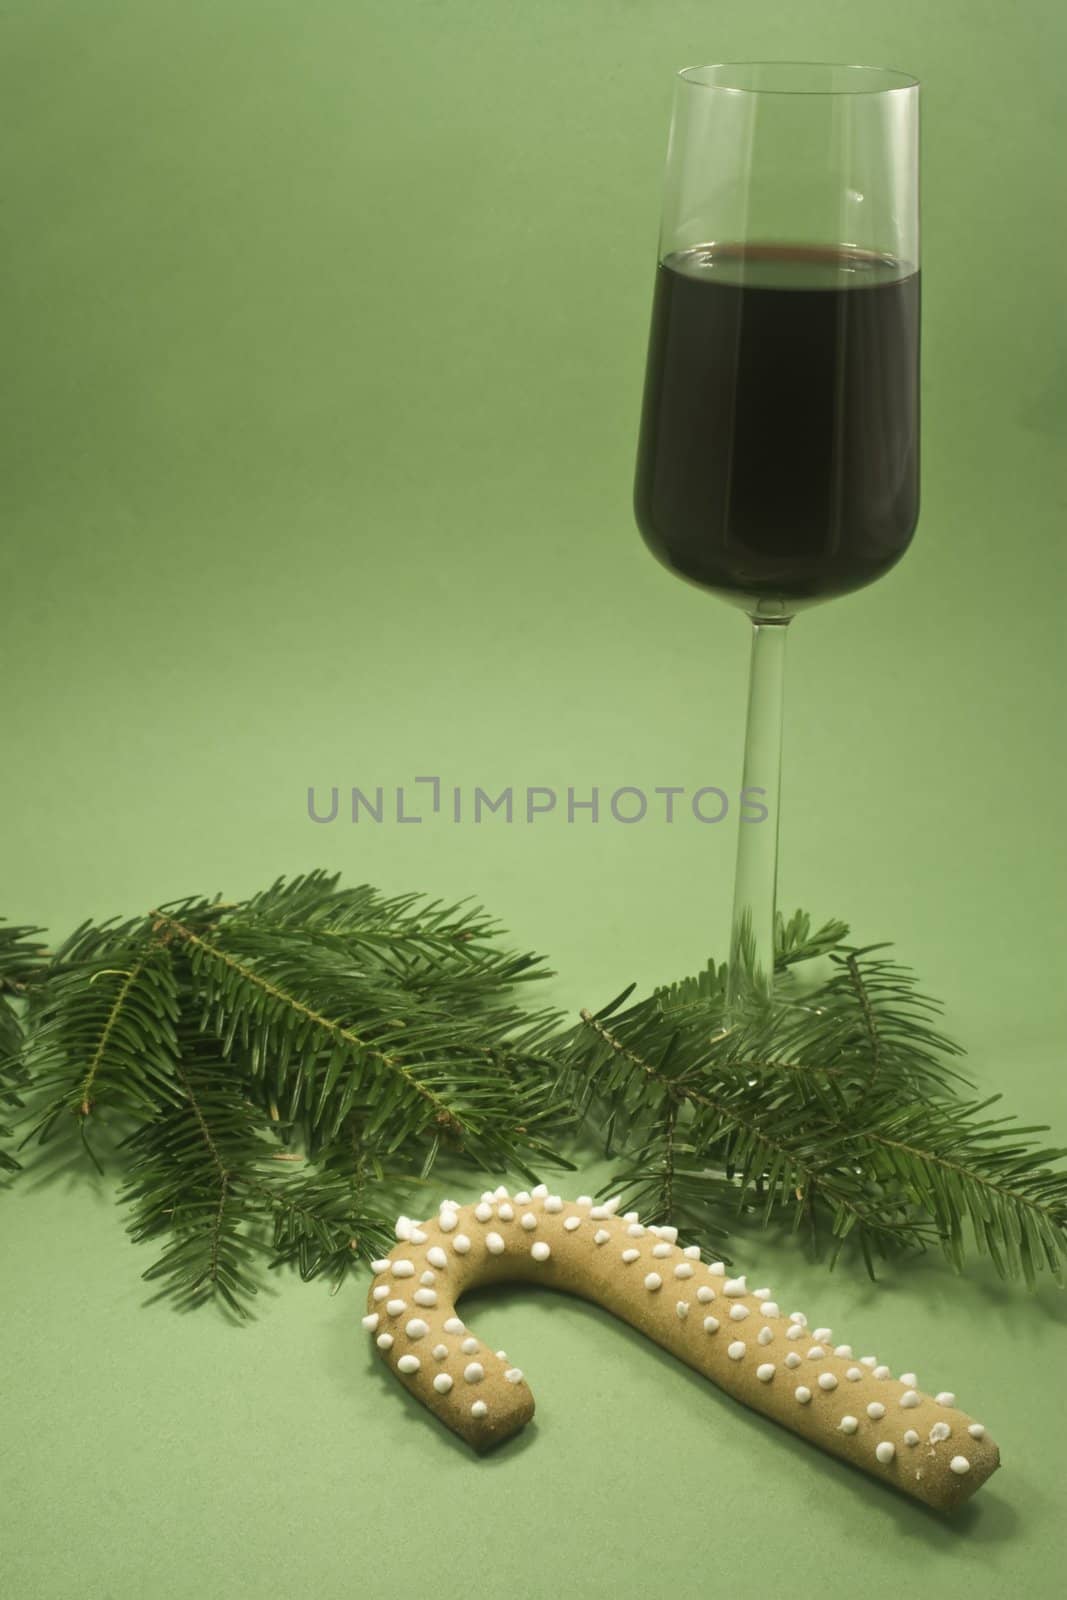 A glass of red wine and candy cane cookie with fir branch isolated on green paper